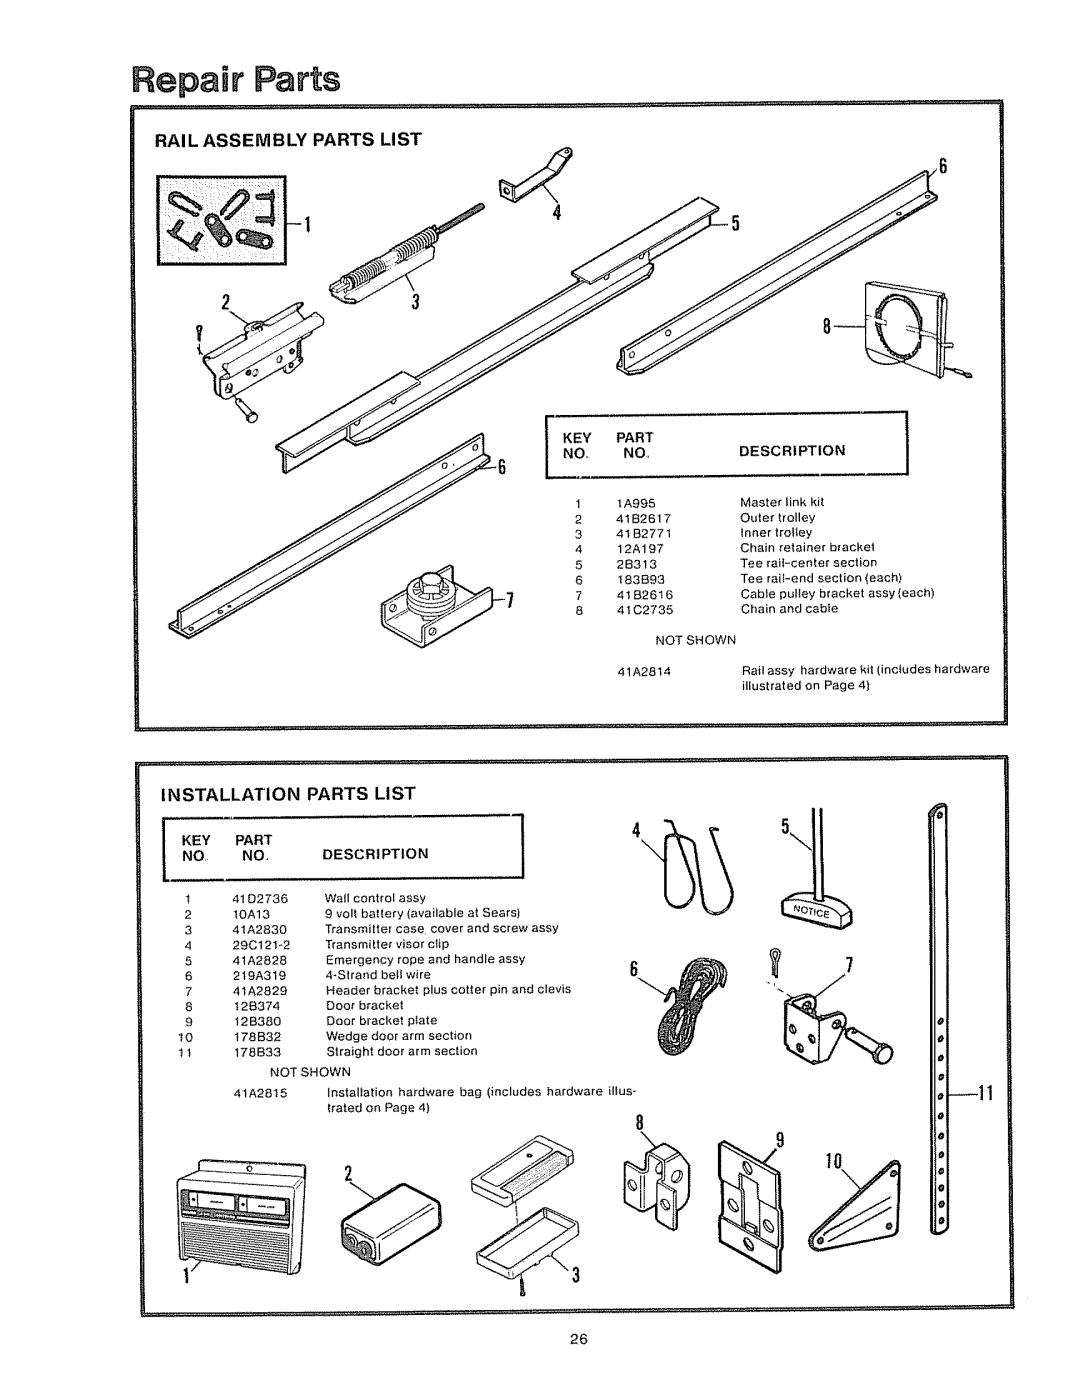 Craftsman 39535006 specifications Repair Parts, Rai L Assembly Parts List, Installation, trotey, Description, pIate, trated 